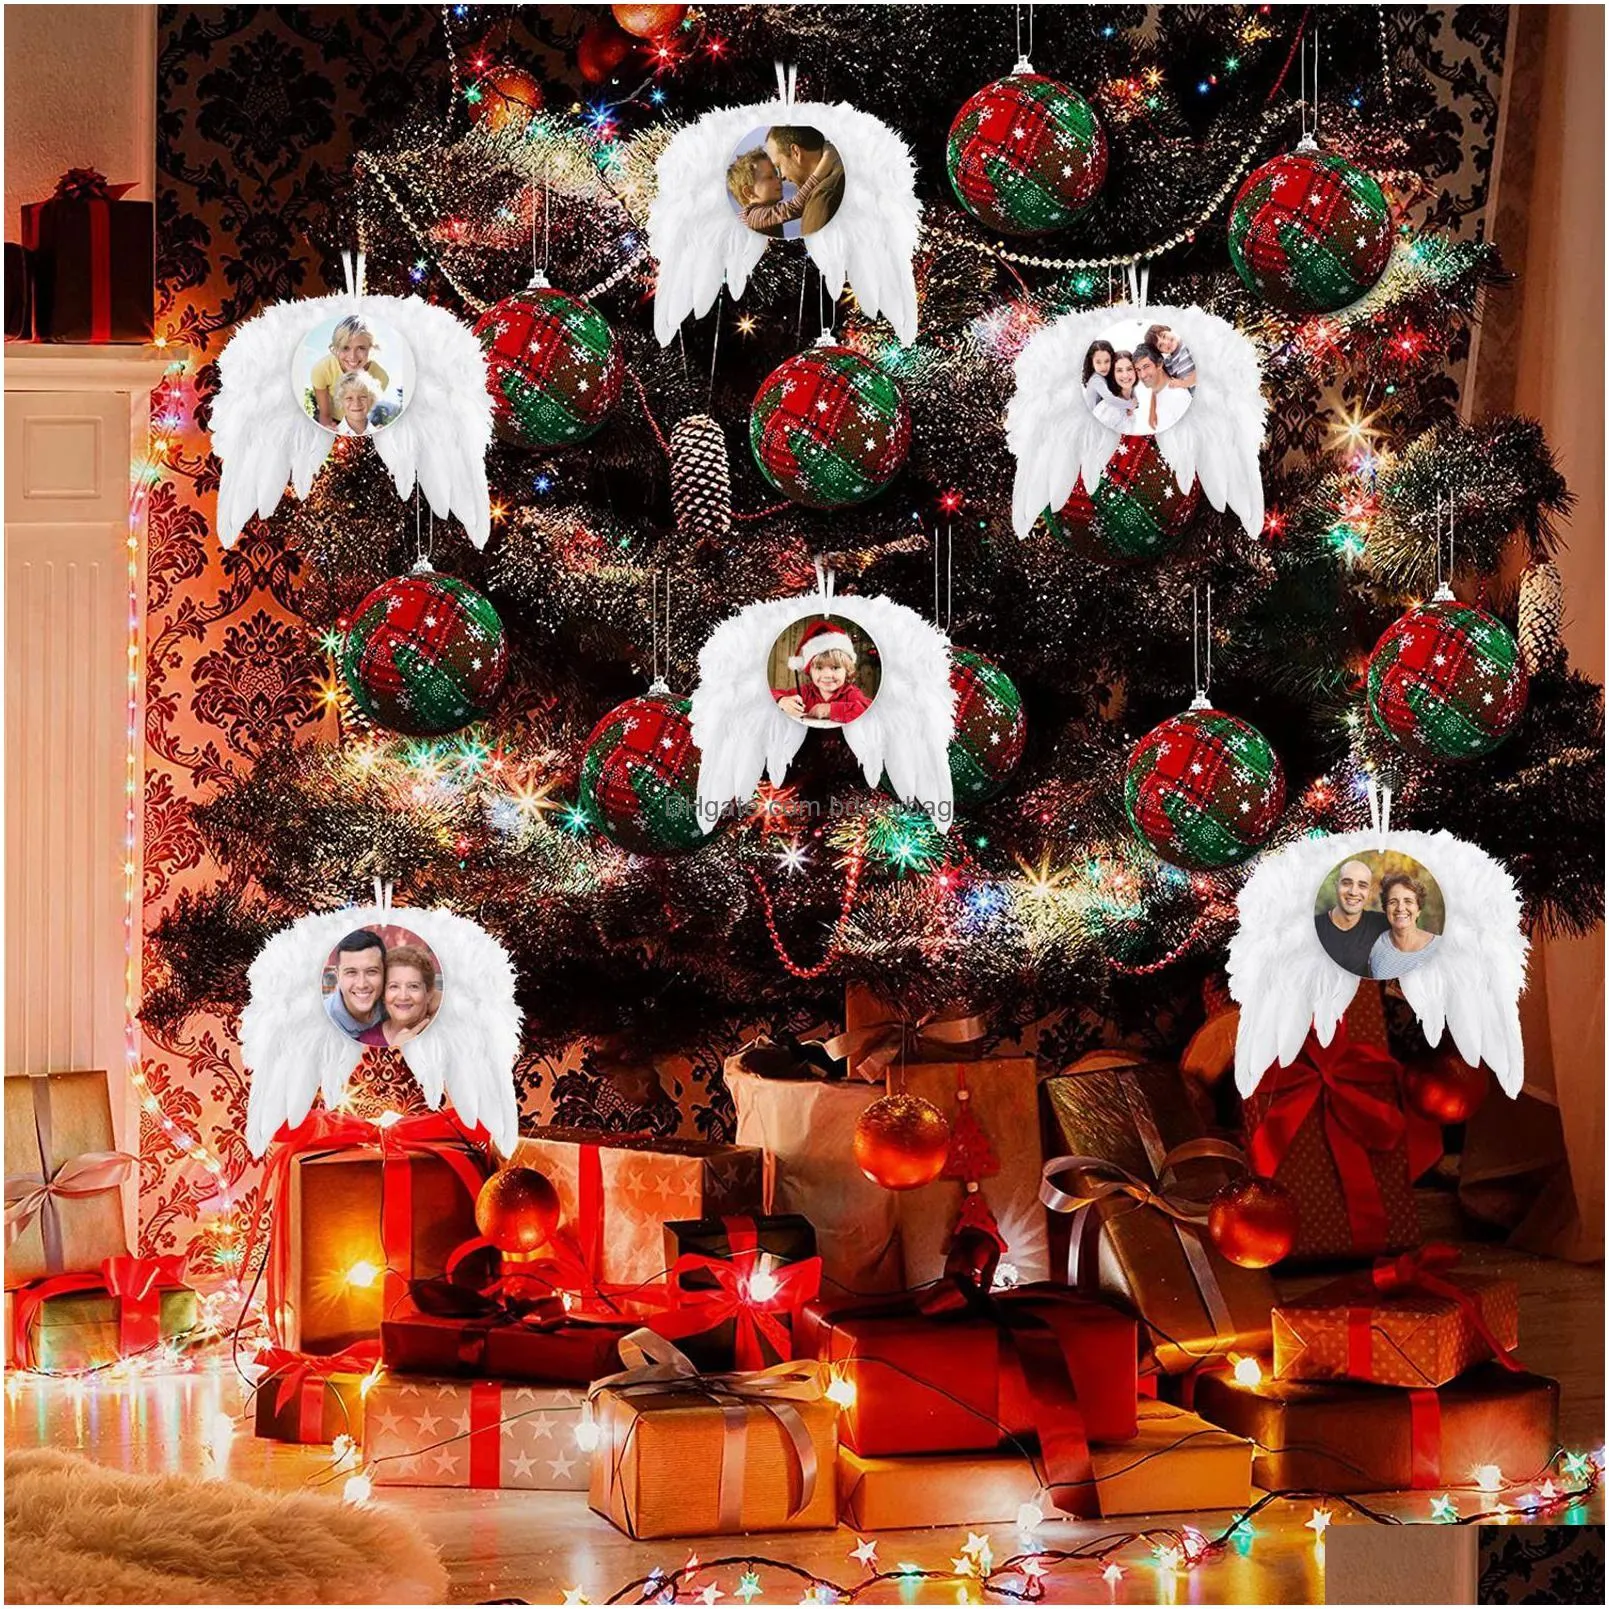 heat transfer angel wings christmas decoration feathers pendant round and heart double layer diy christmas tree hanging tag rrc212